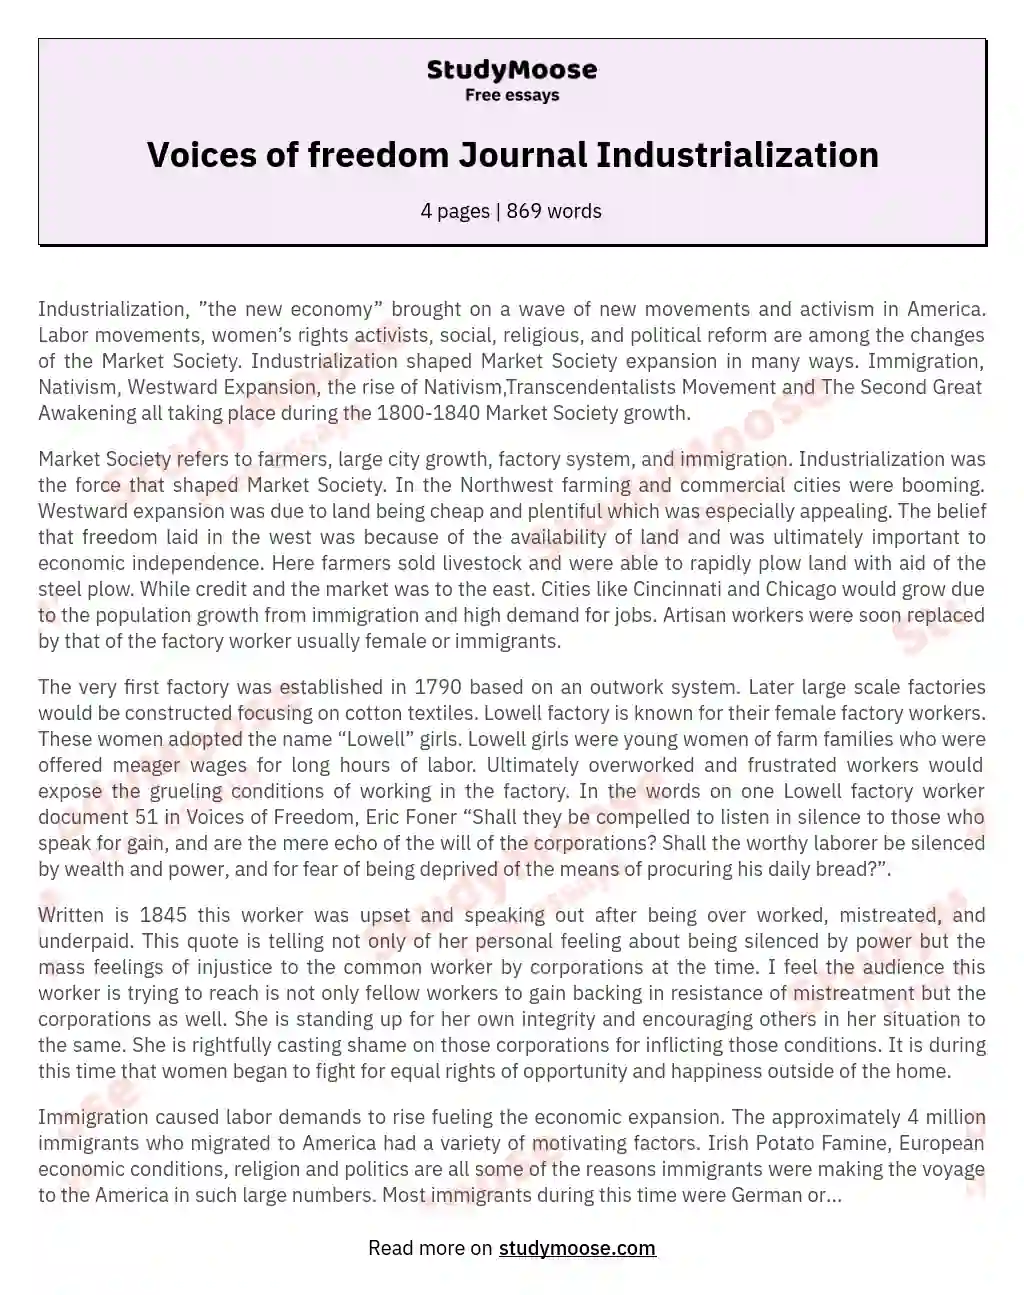 Voices of freedom Journal Industrialization essay